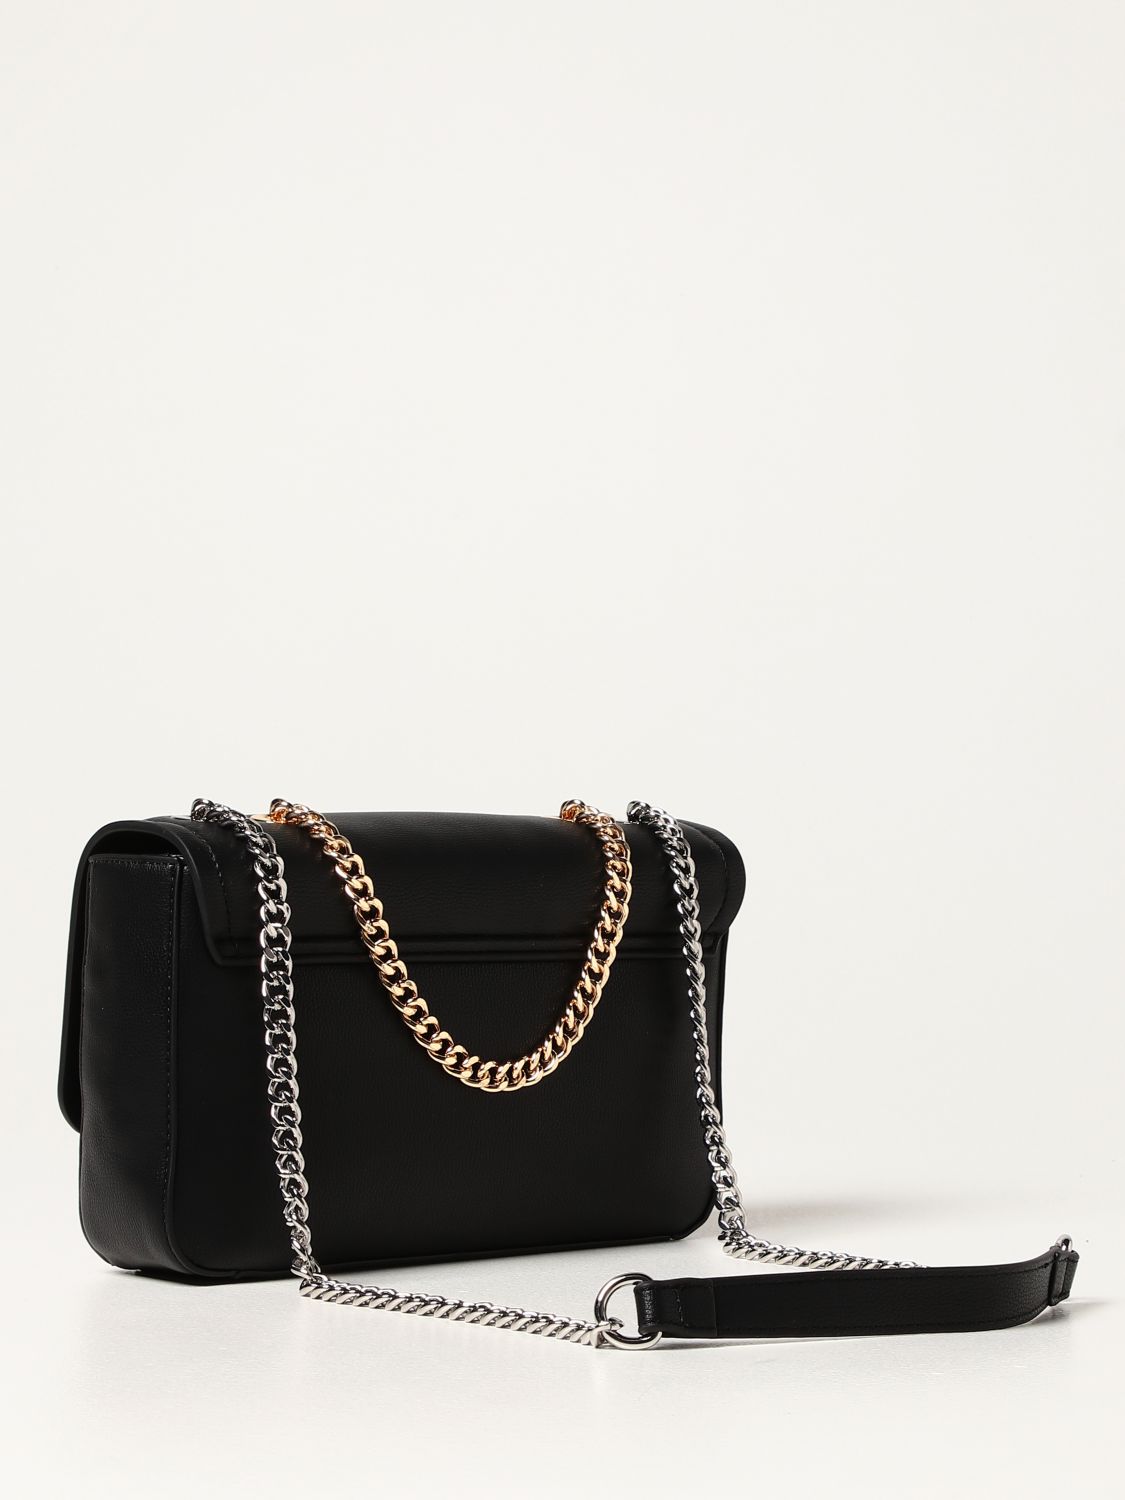 TWIN SET: Twinset bag in grained synthetic leather | Crossbody Bags ...